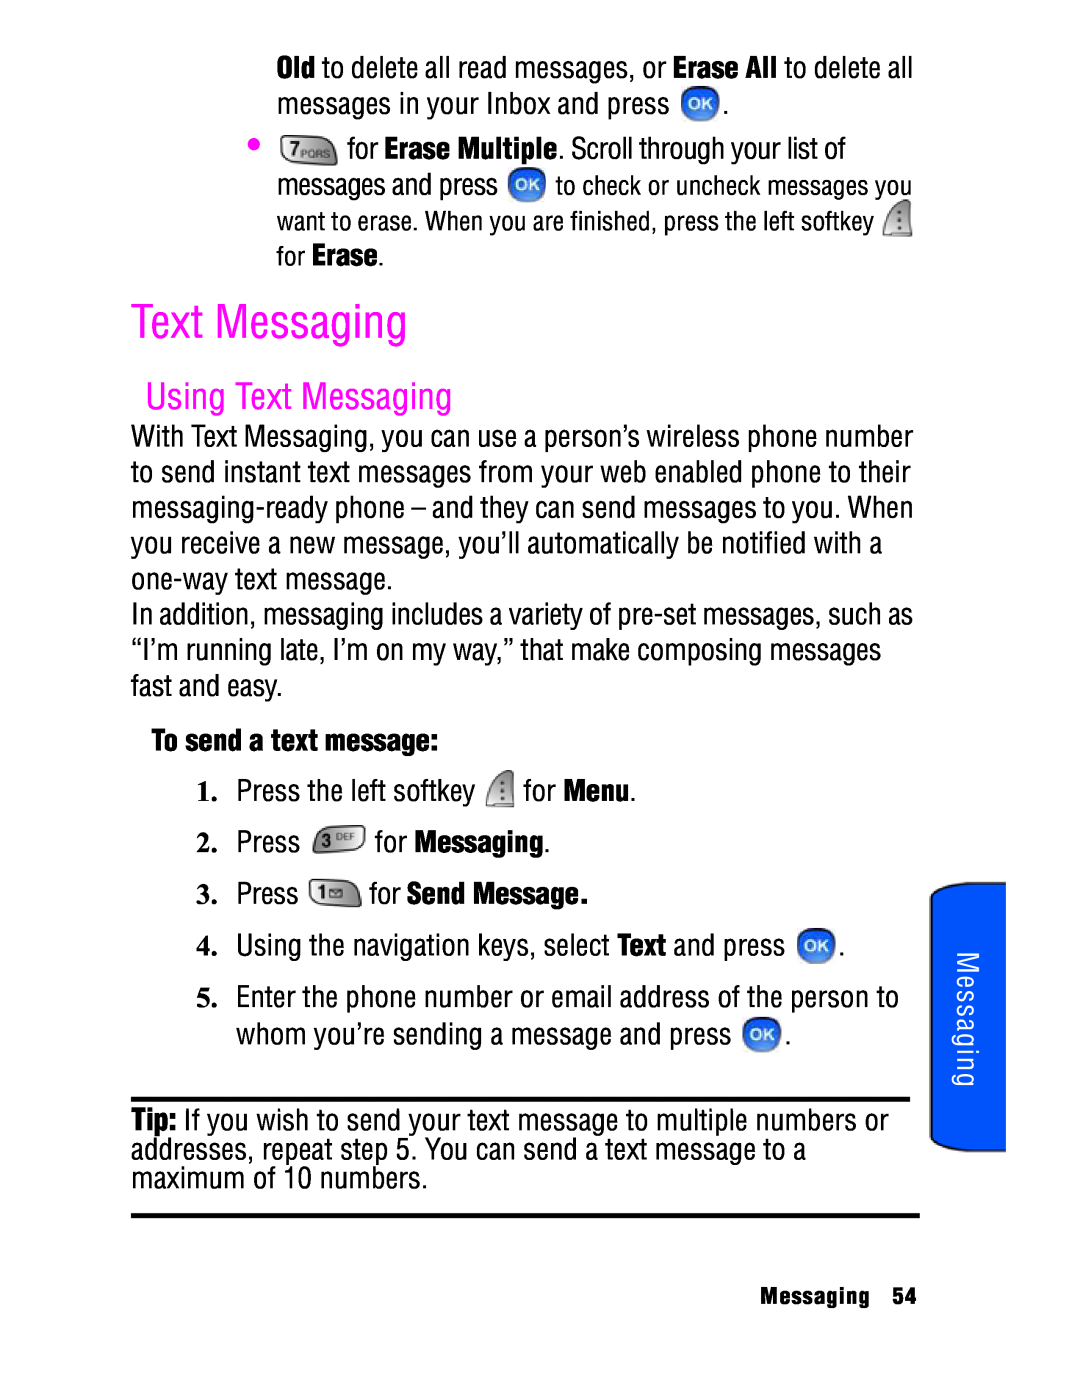 Samsung SPH-a740 manual Using Text Messaging, To send a text message, Press for Send Message 